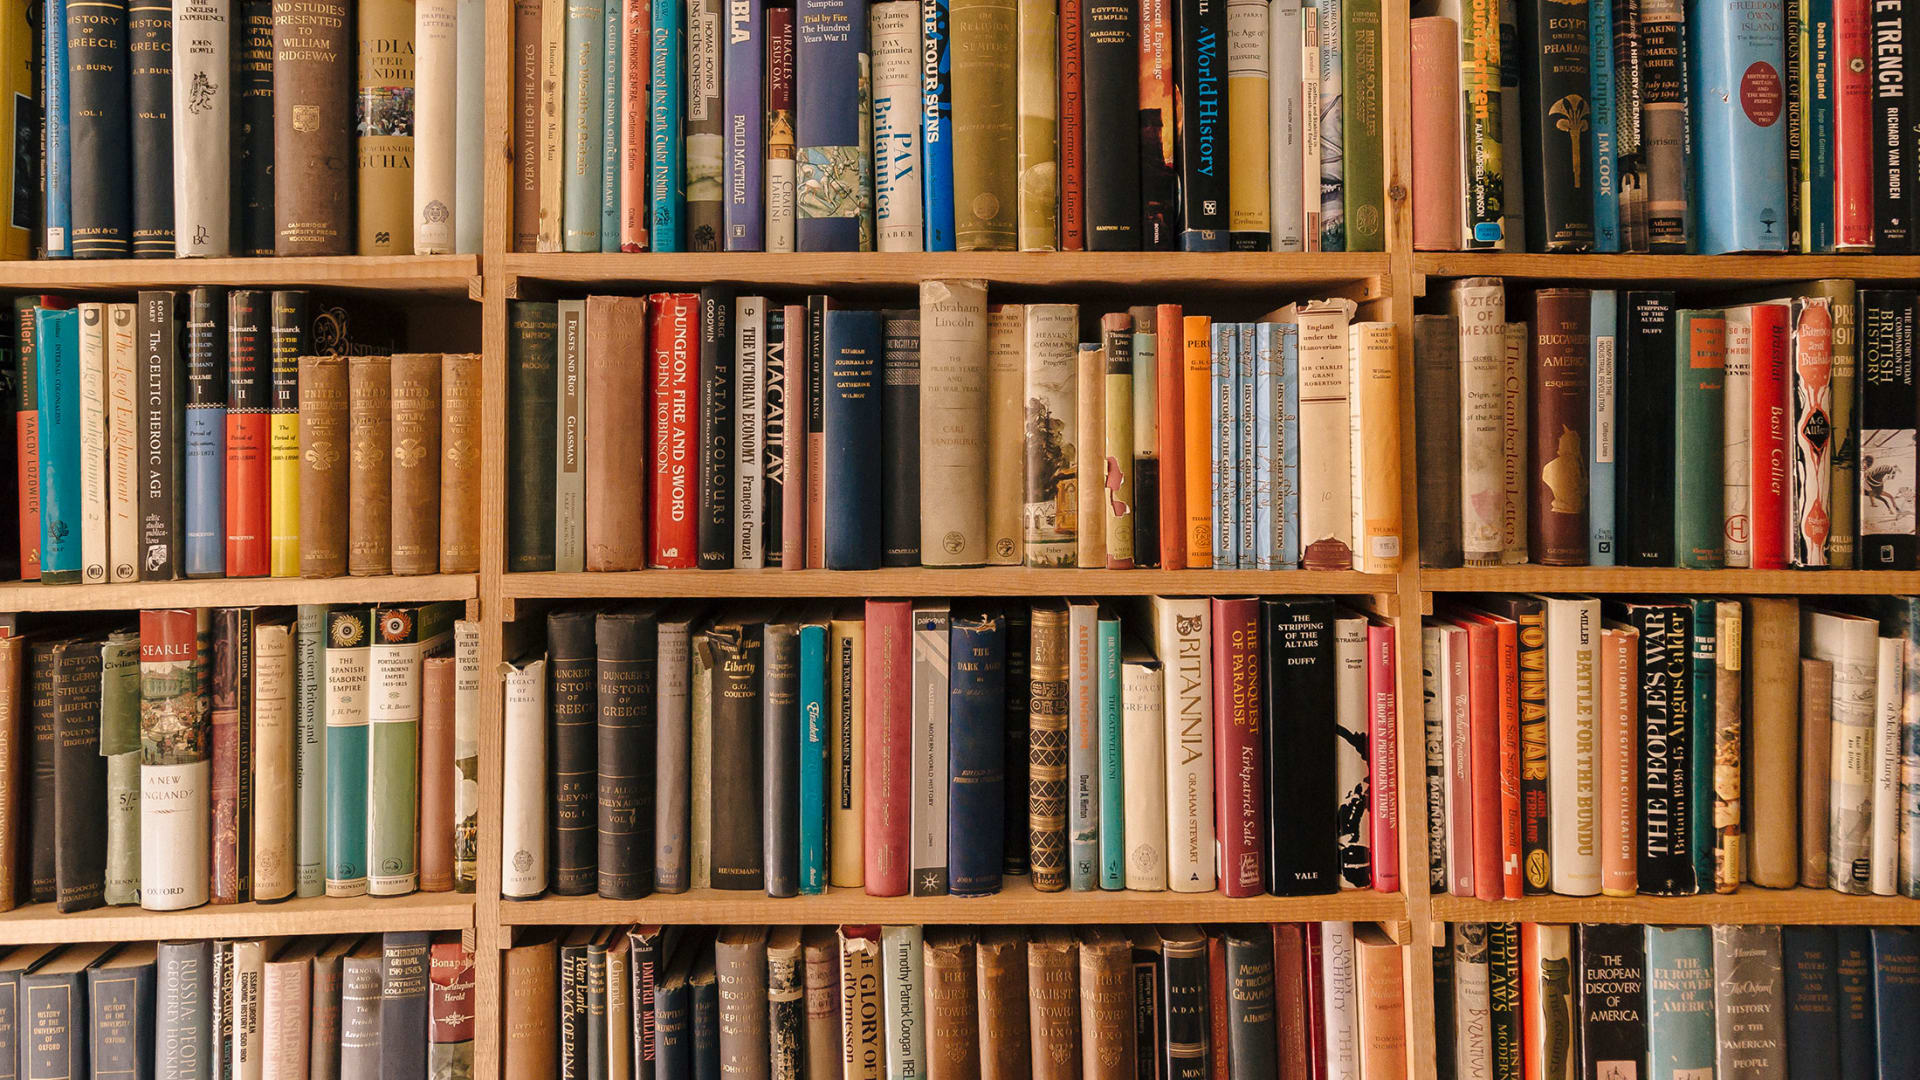 A Super Reader Who Gets Through Hundreds of Books a Year Explains How to Read Way More